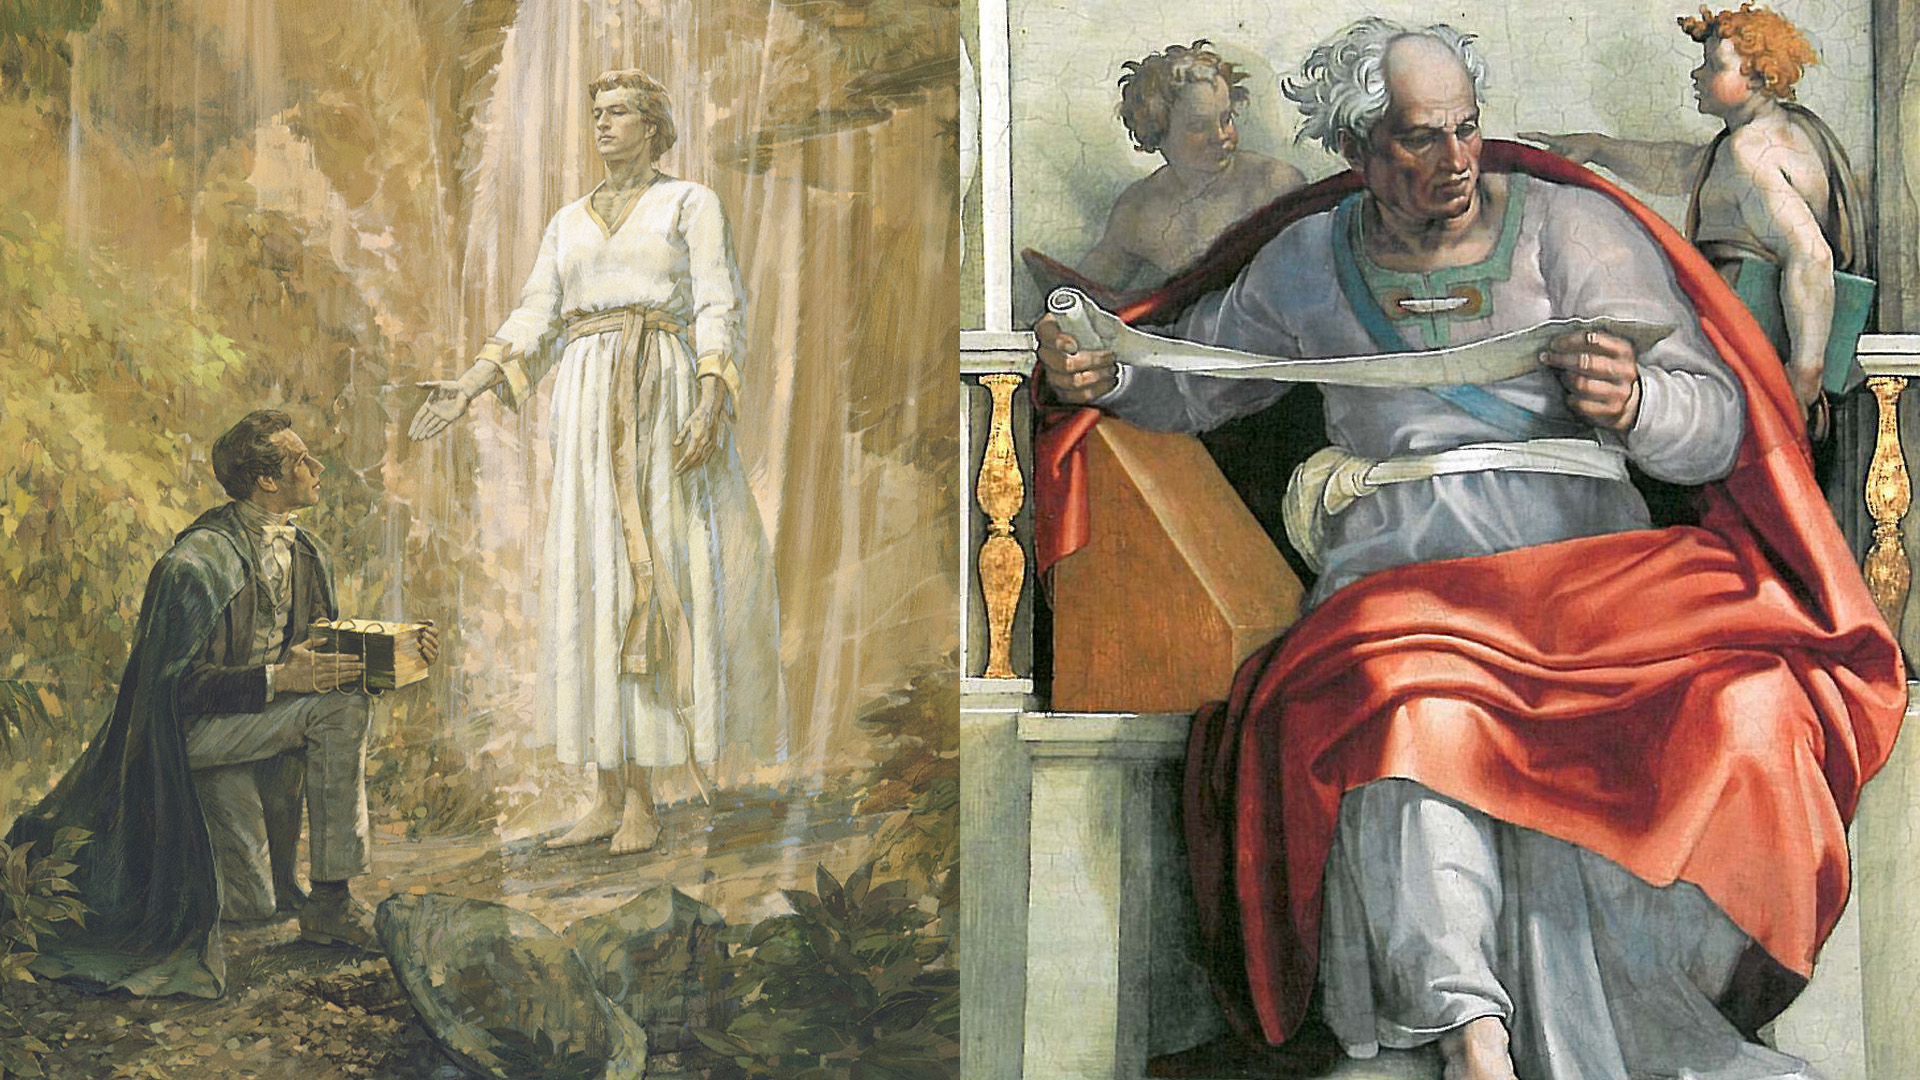 Moroni Appears to Joseph Smith by Tom Lovell and the Prophet Joel by Michelangelo.